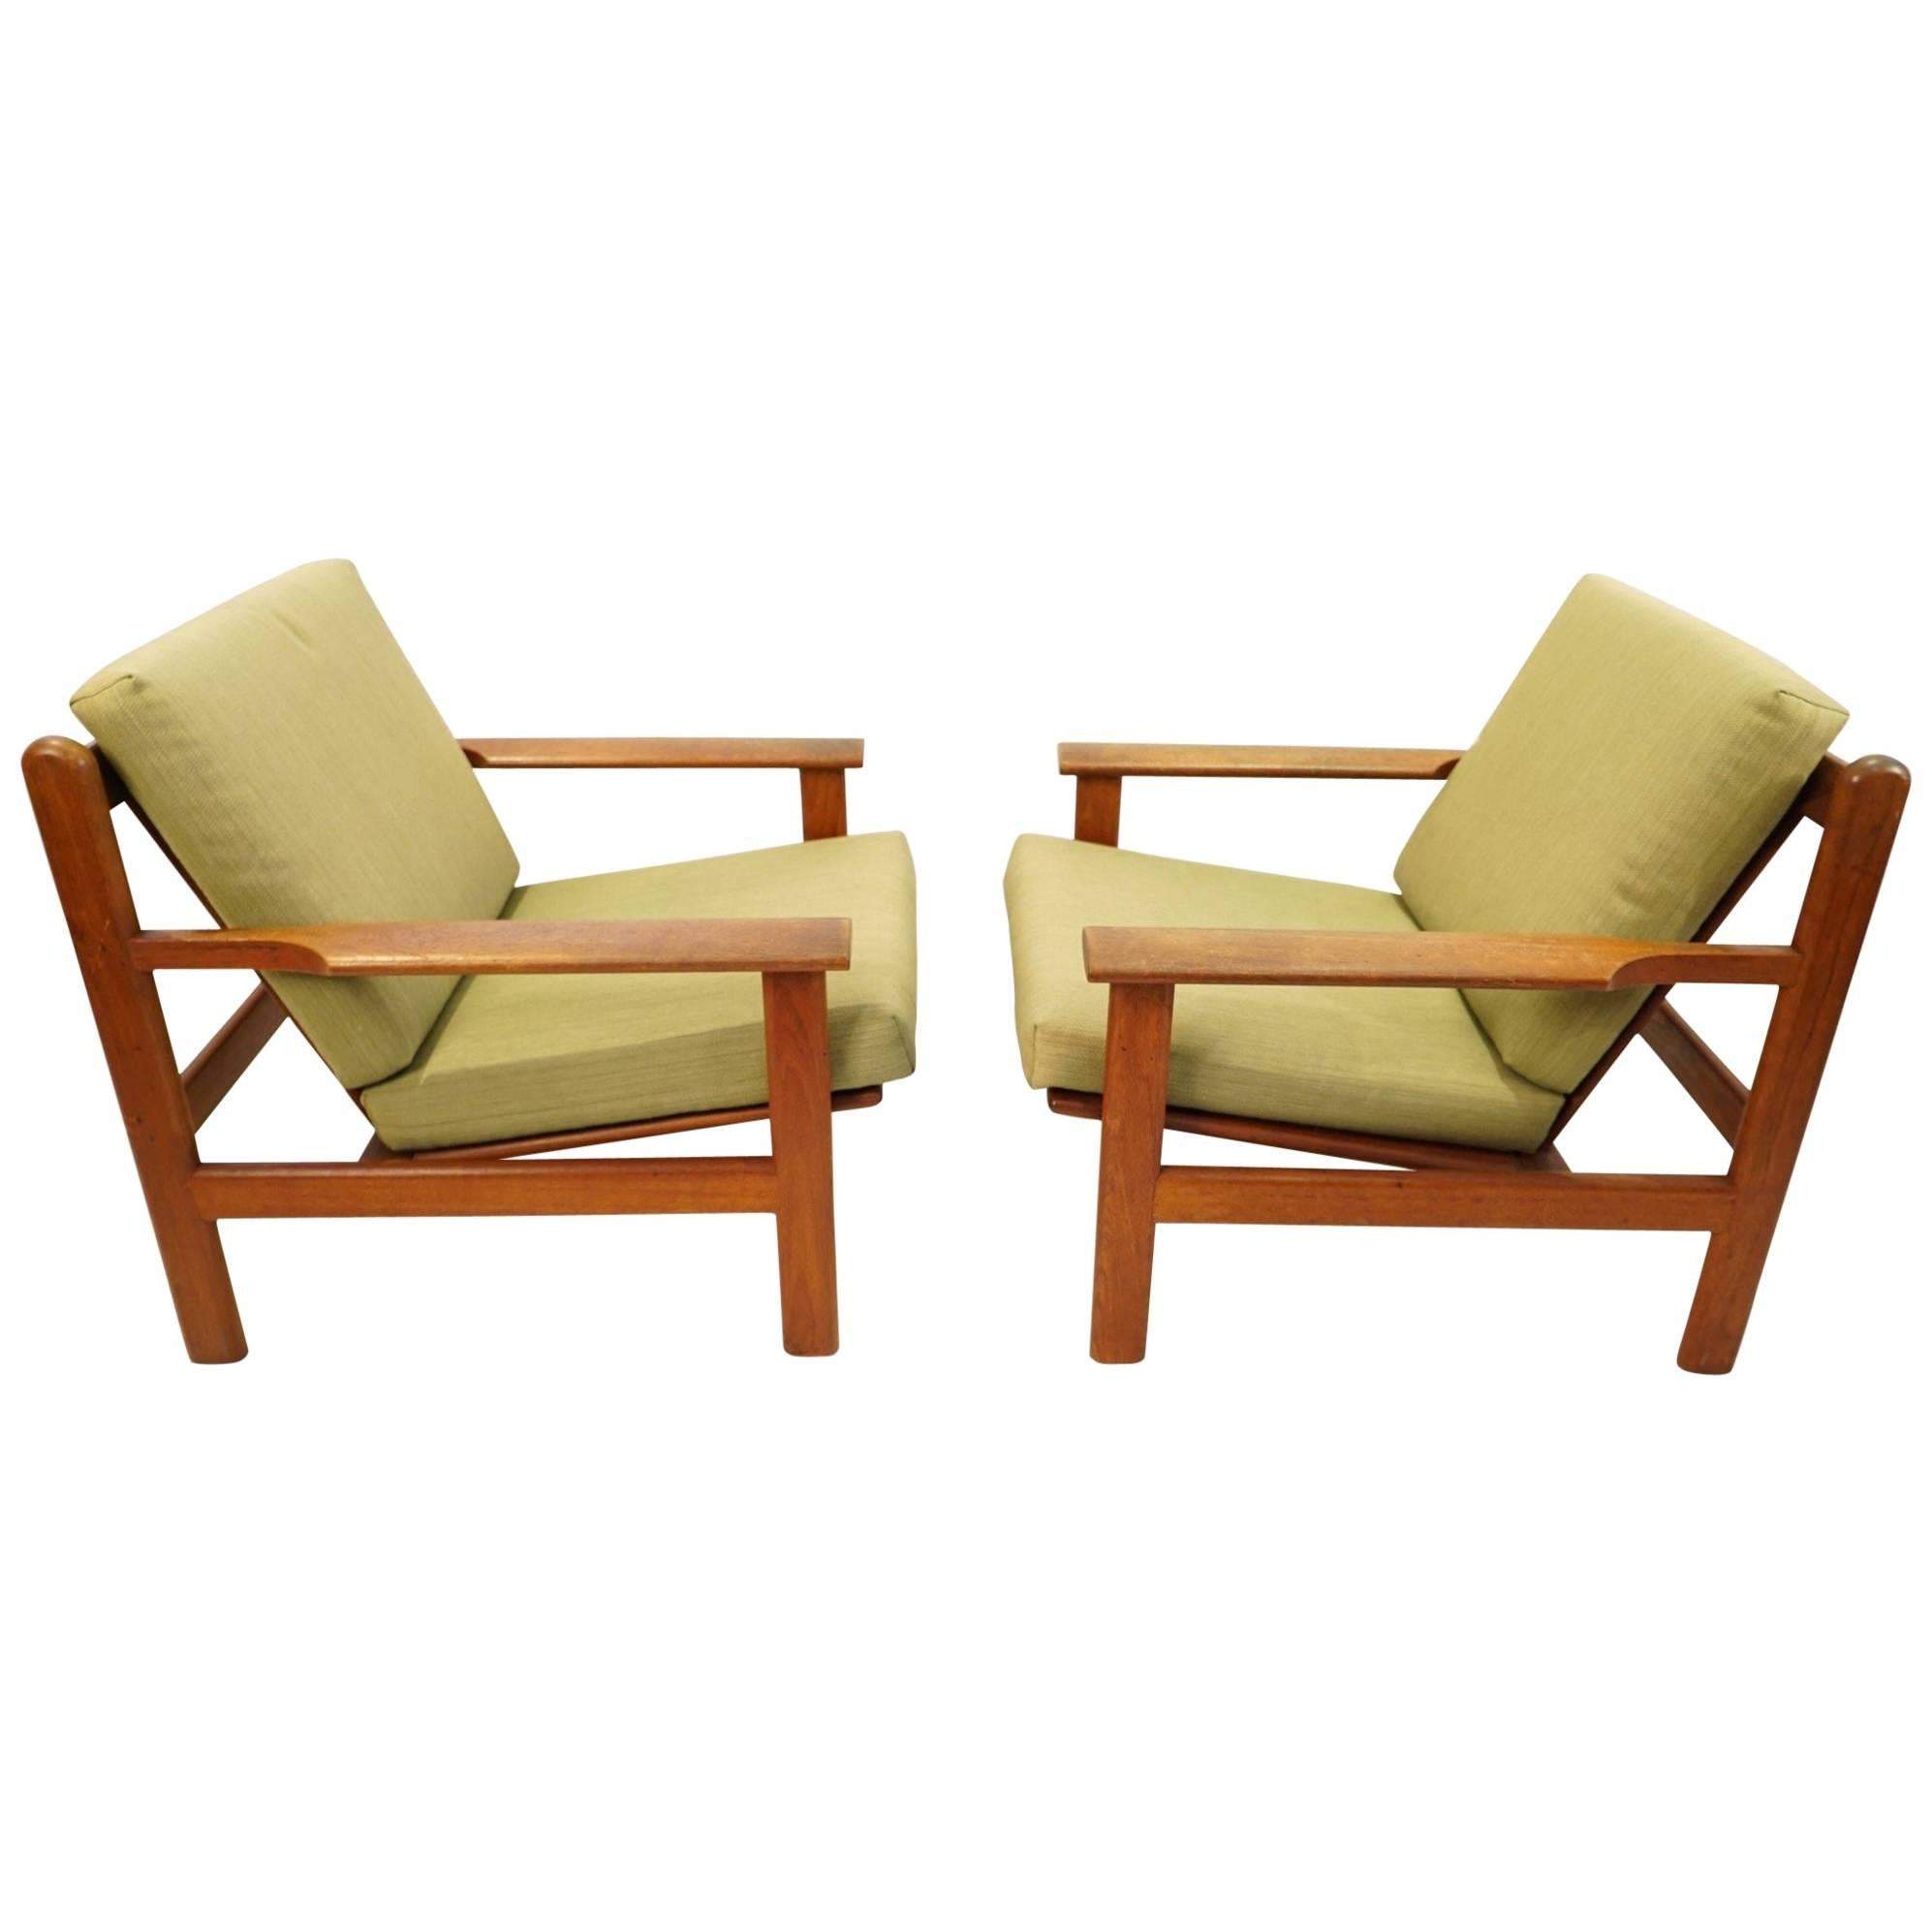 Pair of Easy Chairs by Poul Volther for Frem Rølje